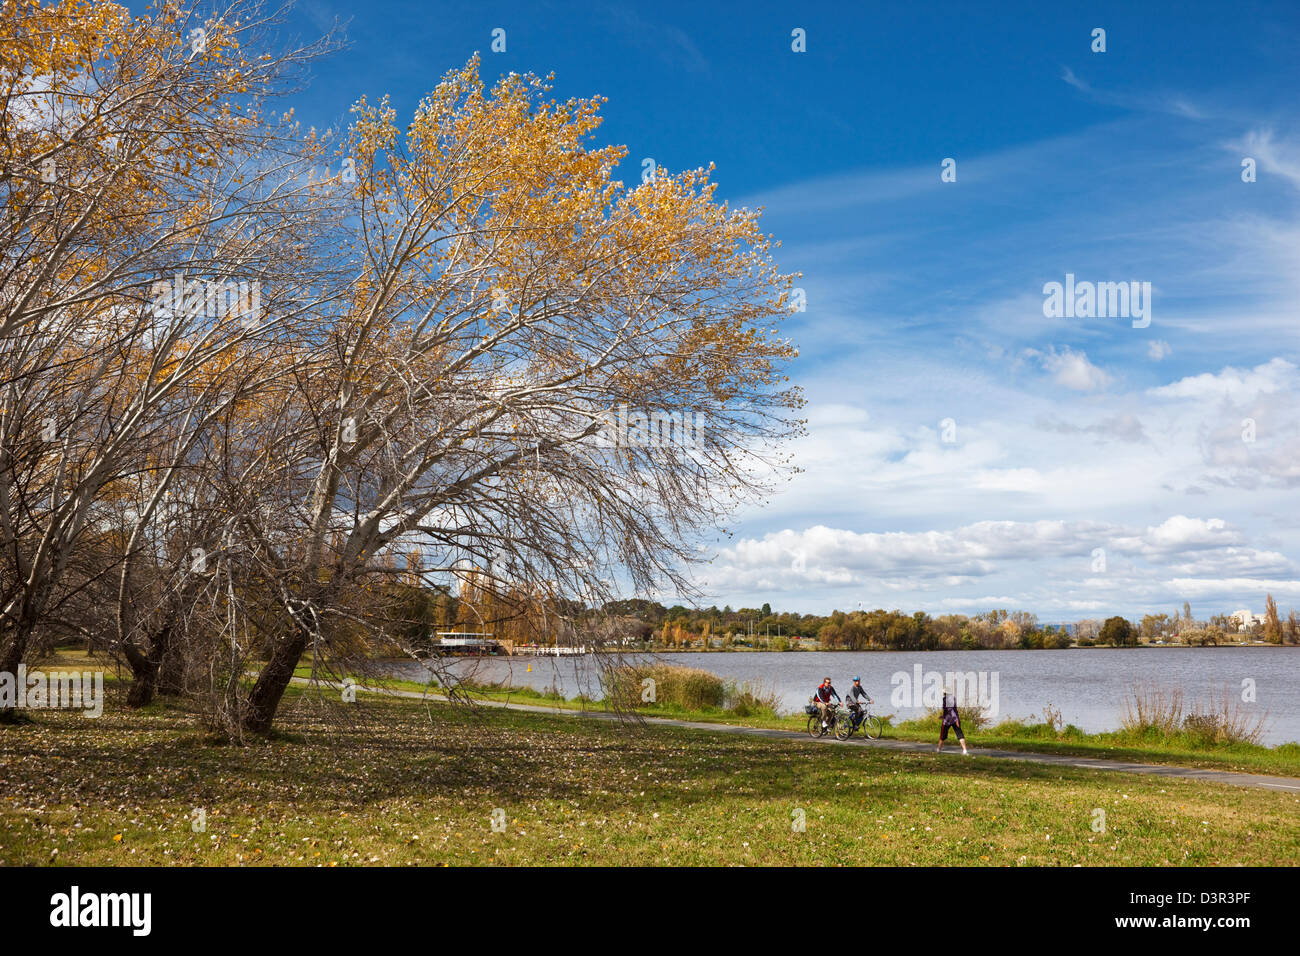 Walkers and cyclists on banks of Lake Burley Griffin. Canberra, Australian Capital Territory (ACT), Australia Stock Photo